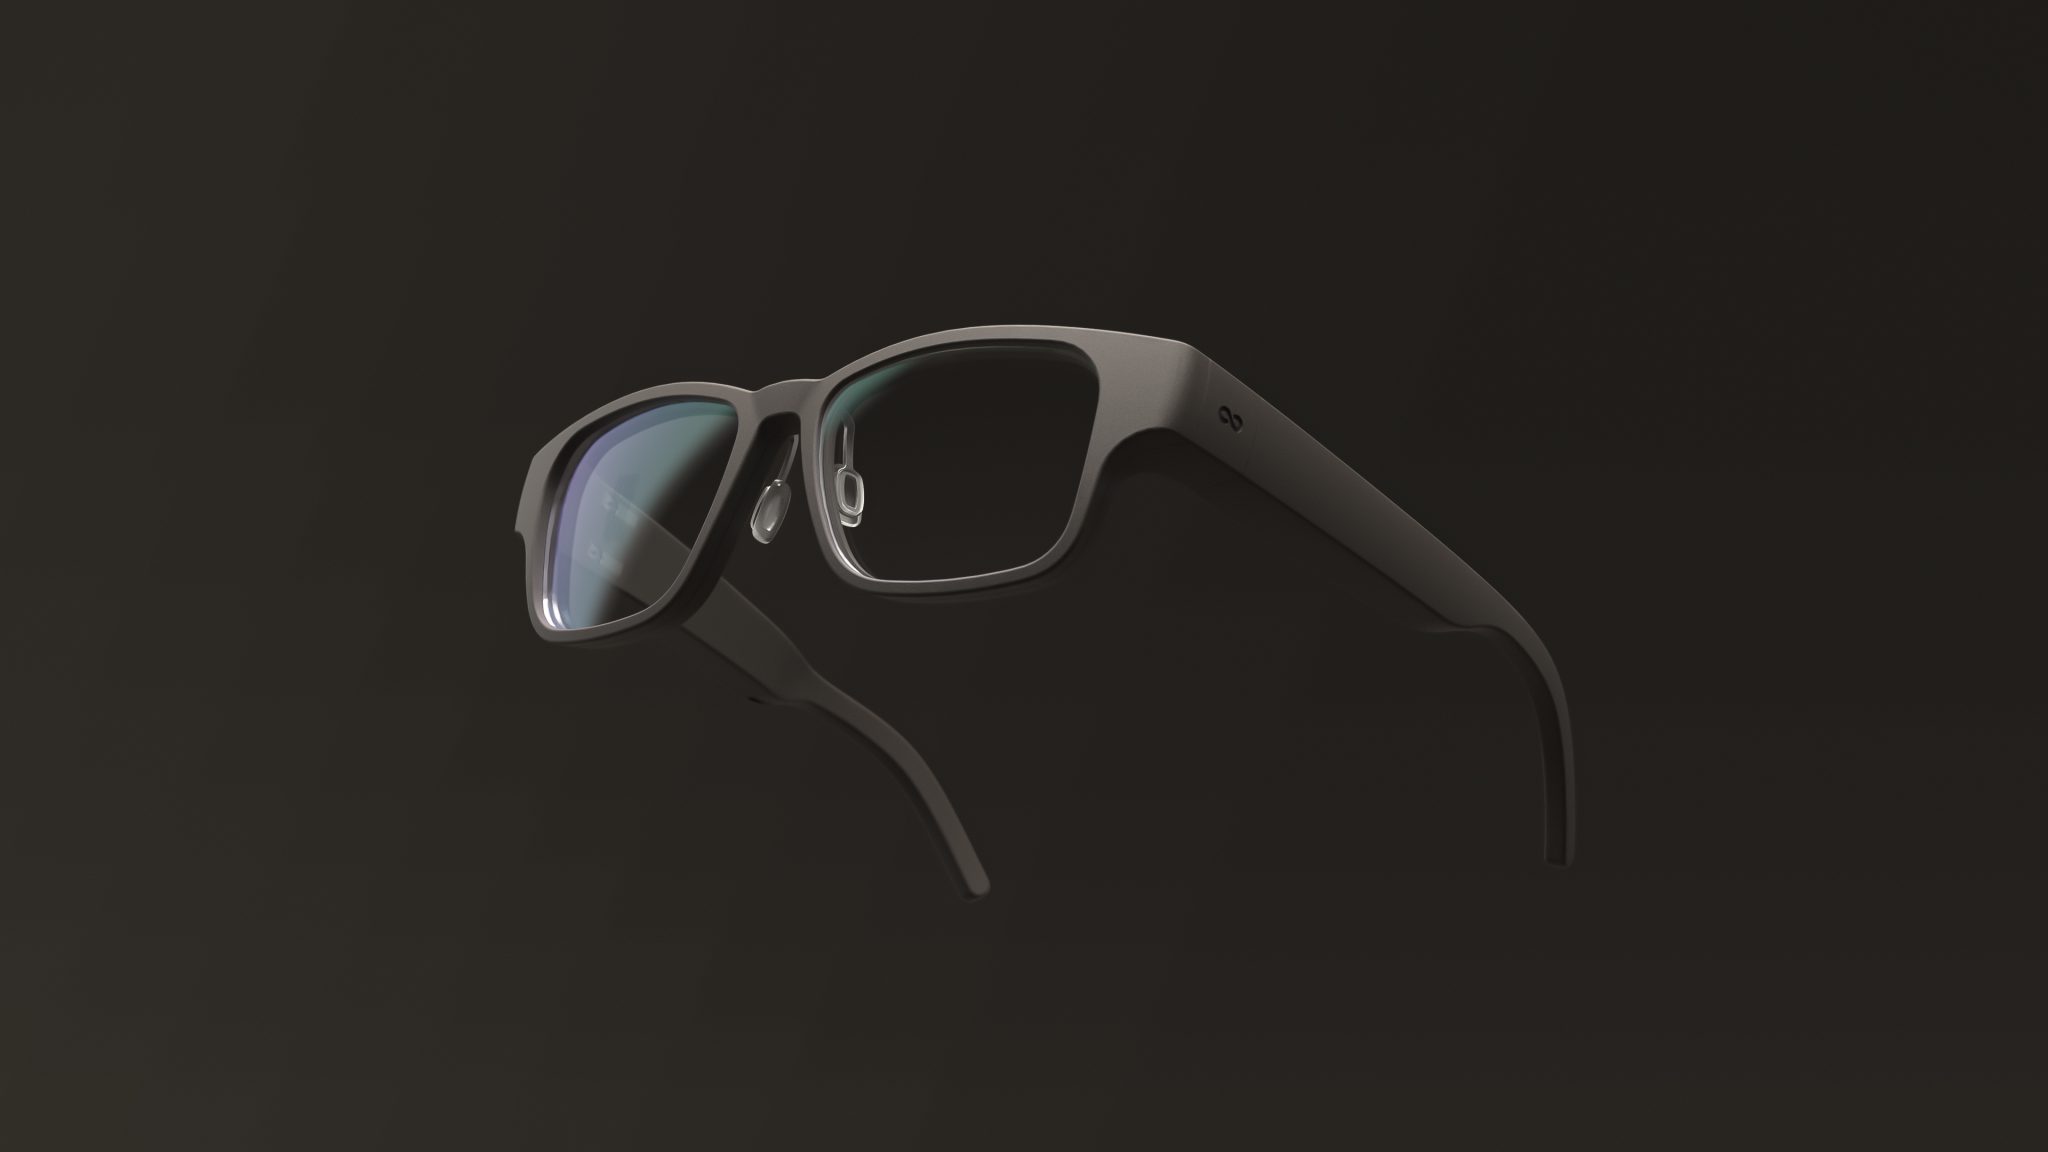 ZEISS has assumed full ownership of AR/VR company tooz. The company released its ESSNZ Berlin ophthalmic smart glasses product in May 2022. Courtesy of tooz.